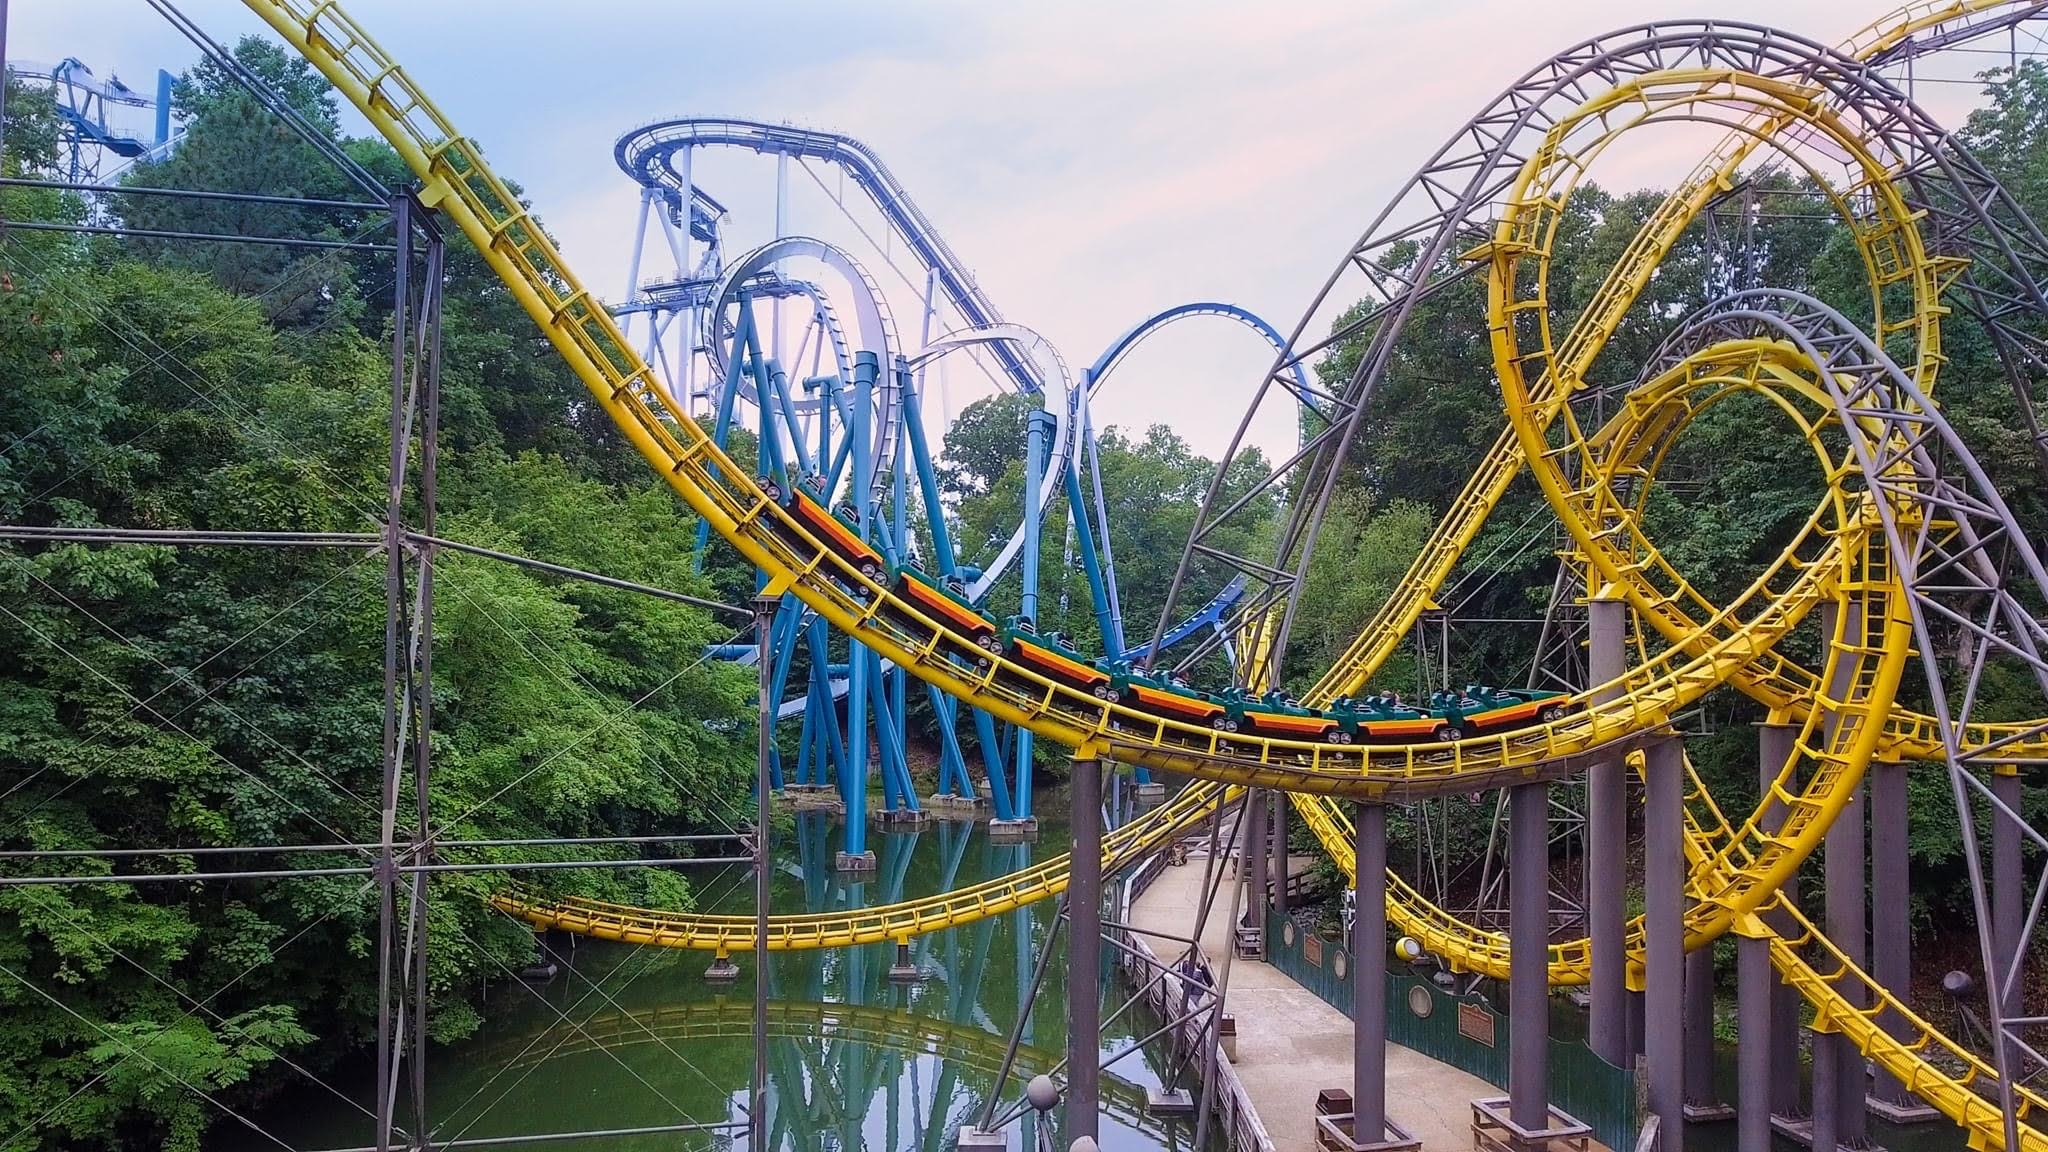 How to Choose: Busch Gardens or King’s Dominion